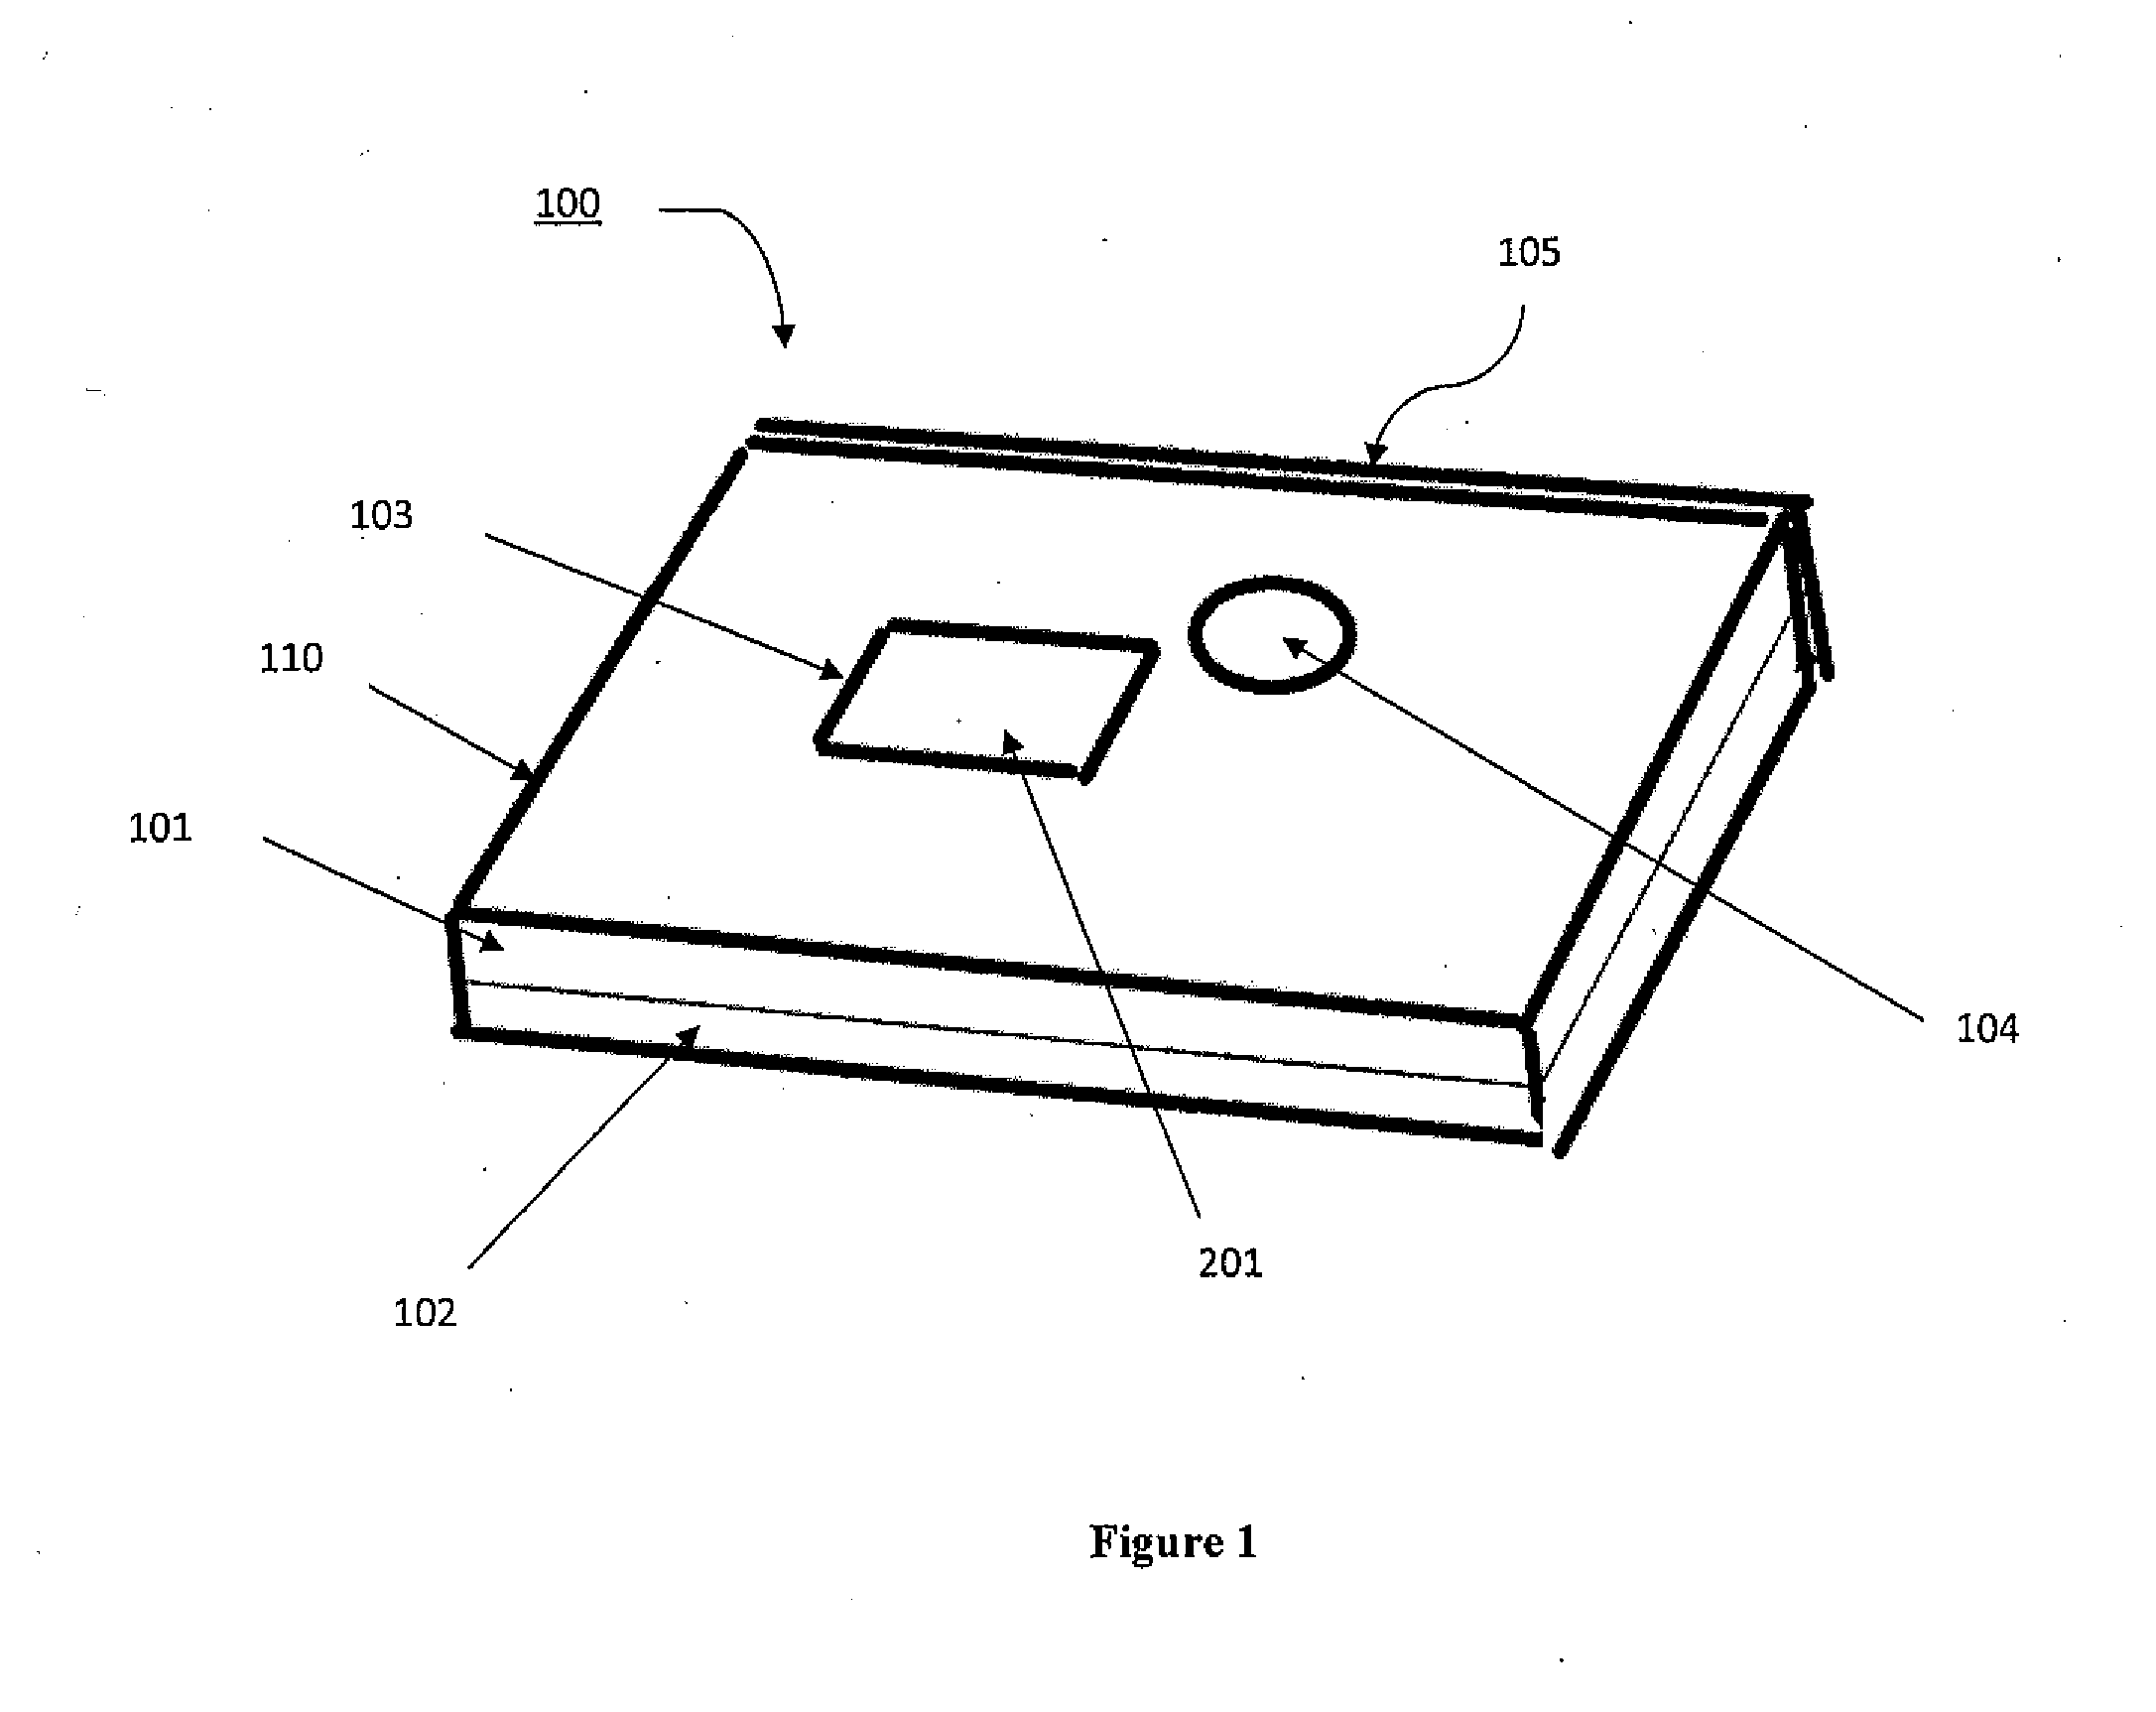 Device and Method for Ambient Storage of Fresh/Frozen Tissue Sections Via Desiccation